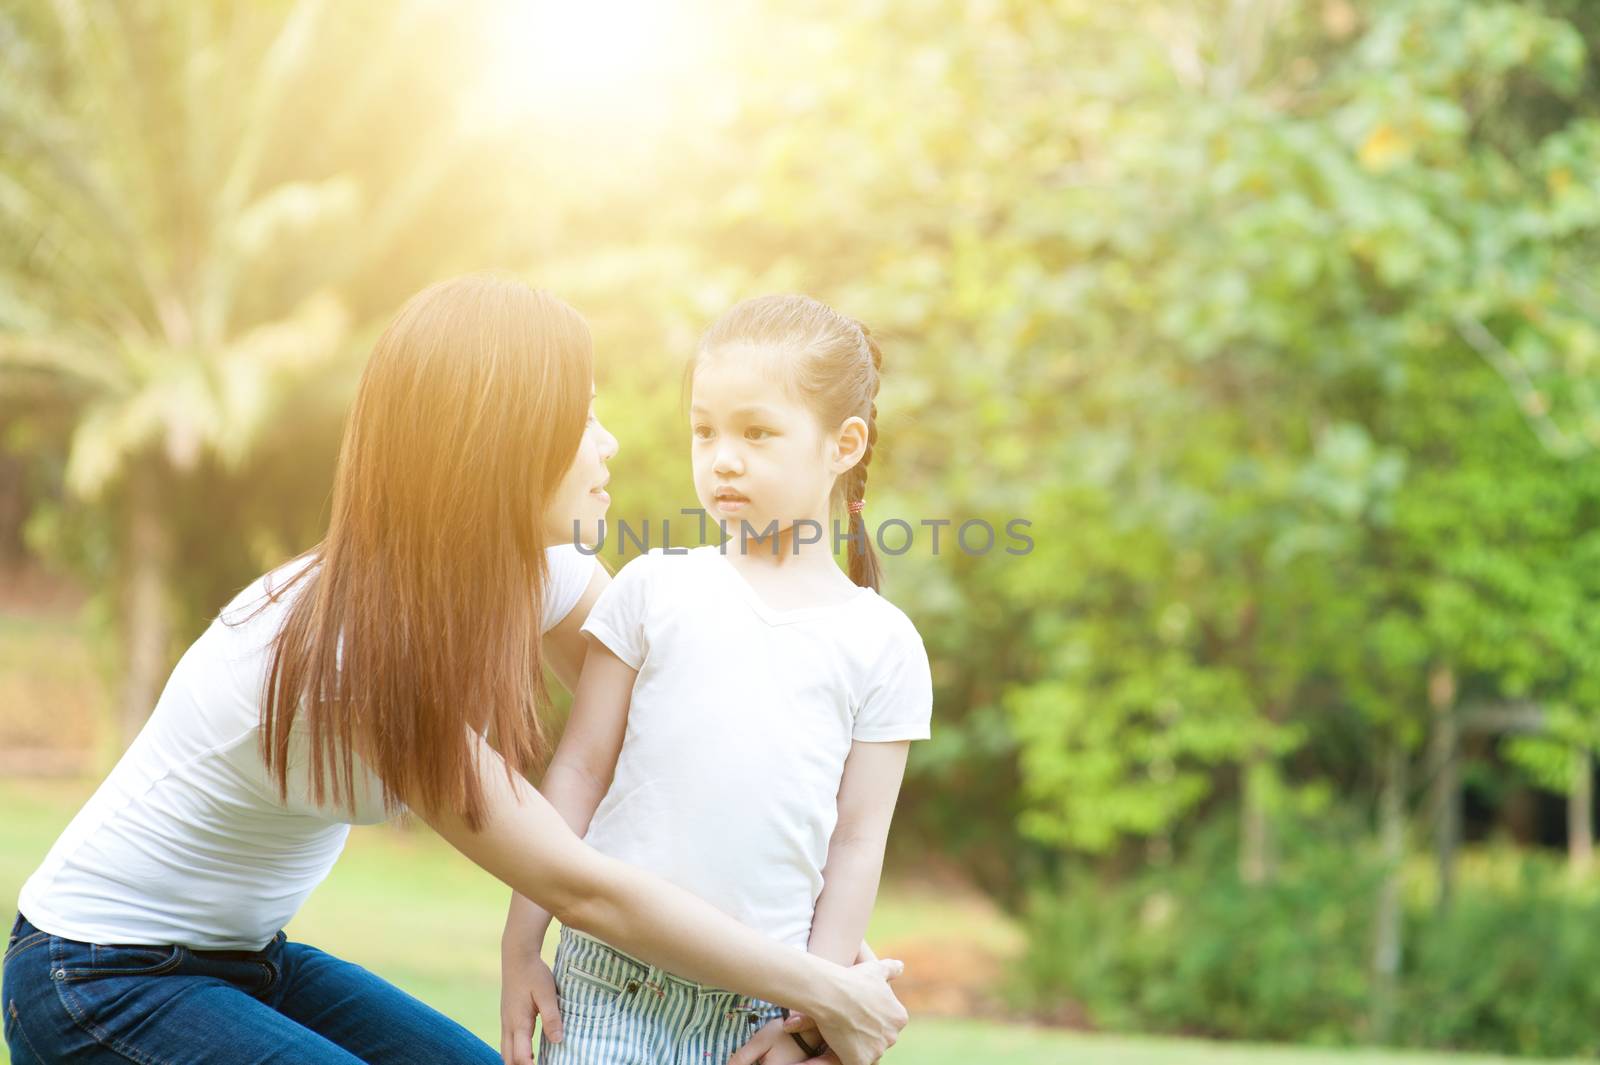 Lifestyle portrait of Asian mother and daughter in the park, Family outdoor fun, morning with sun flare.